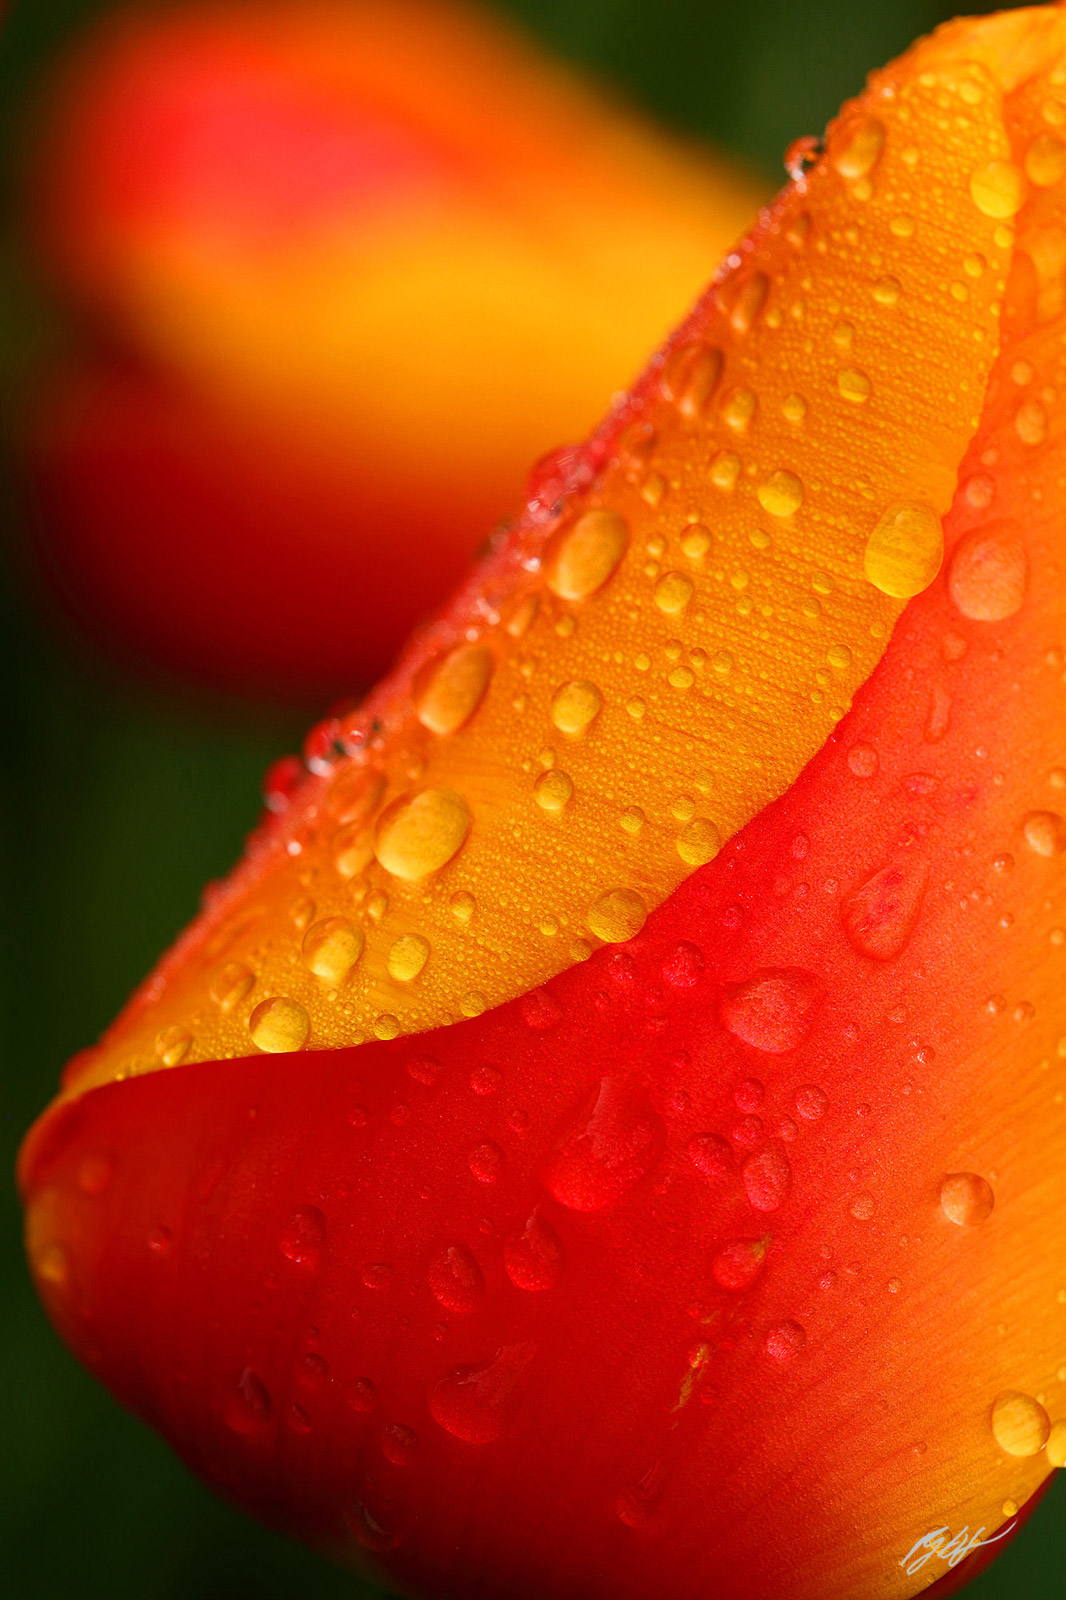 Tulips and Raindrops in Roozengaarde Garden from Skagit Valley in Washington